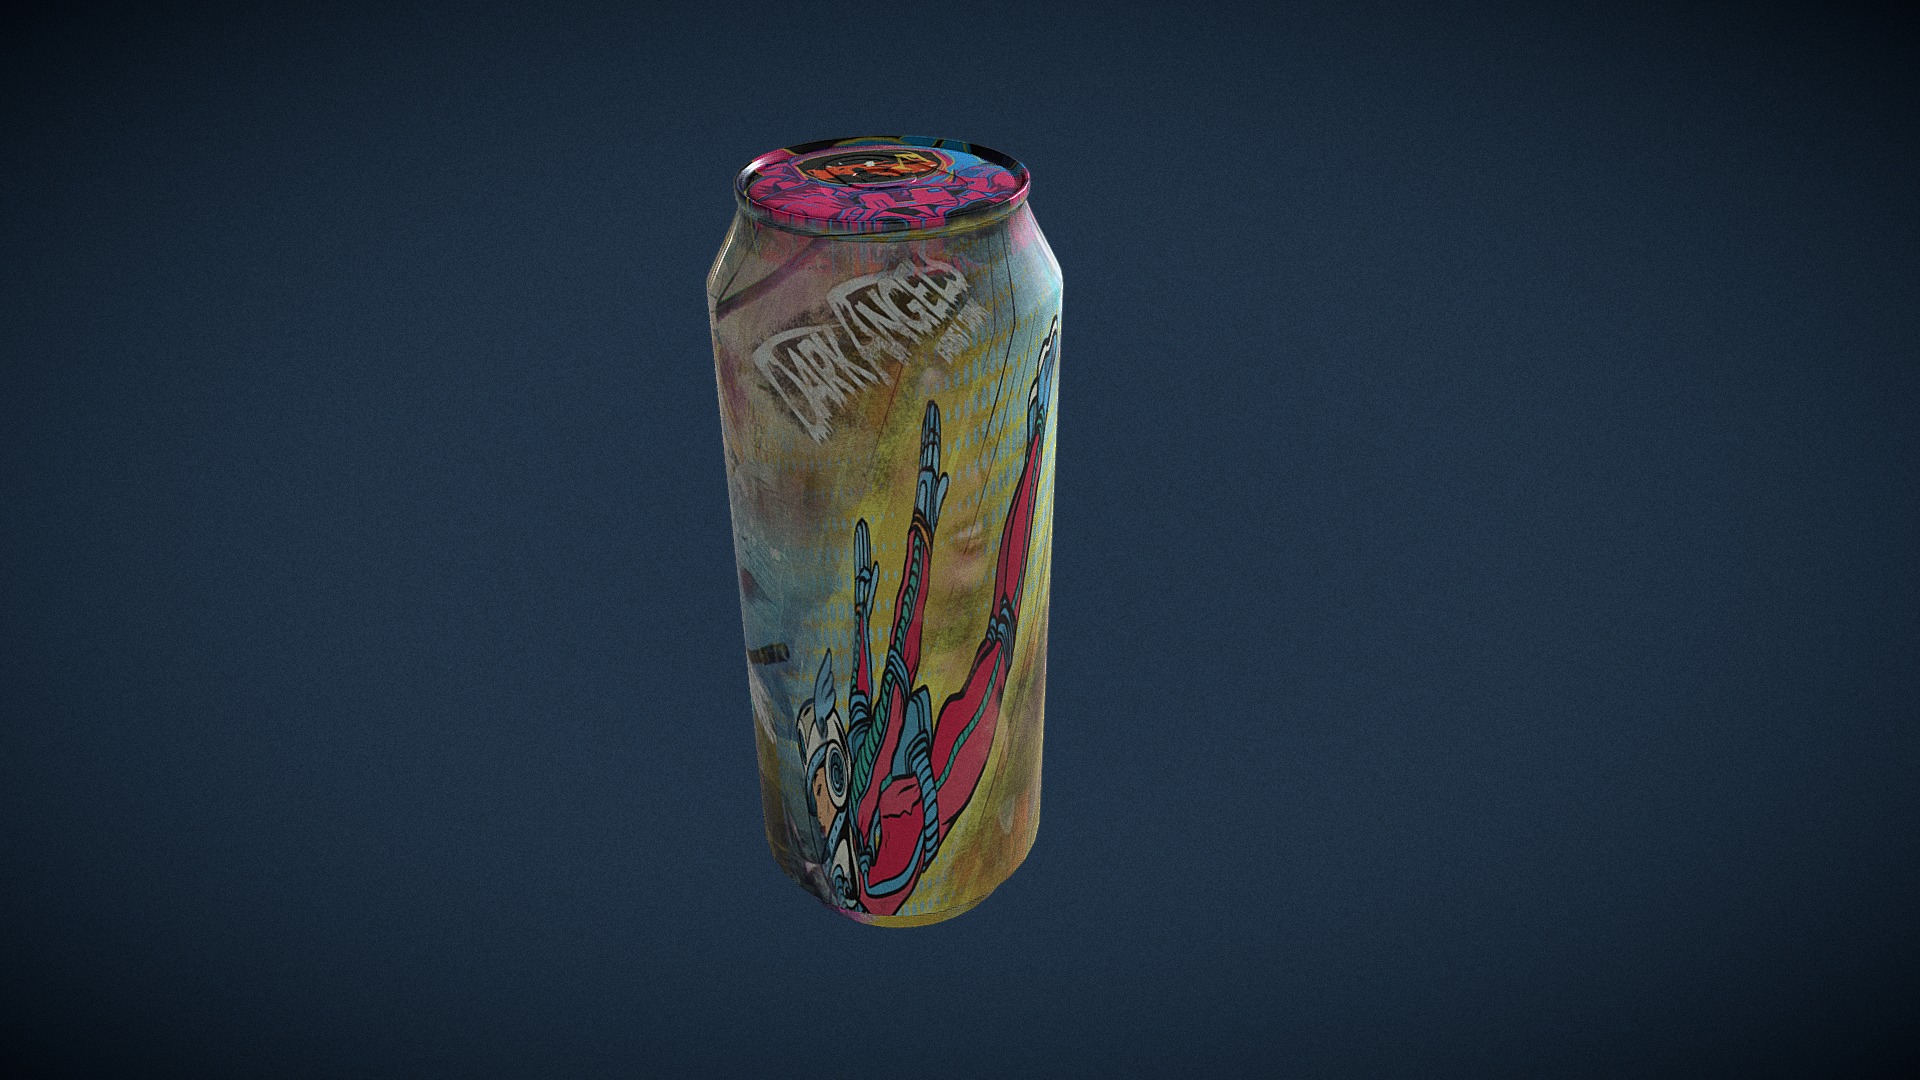 3D model Dark Angels Energy Drink V2 - This is a 3D model of the Dark Angels Energy Drink V2. The 3D model is about a glass jar with a colorful design.